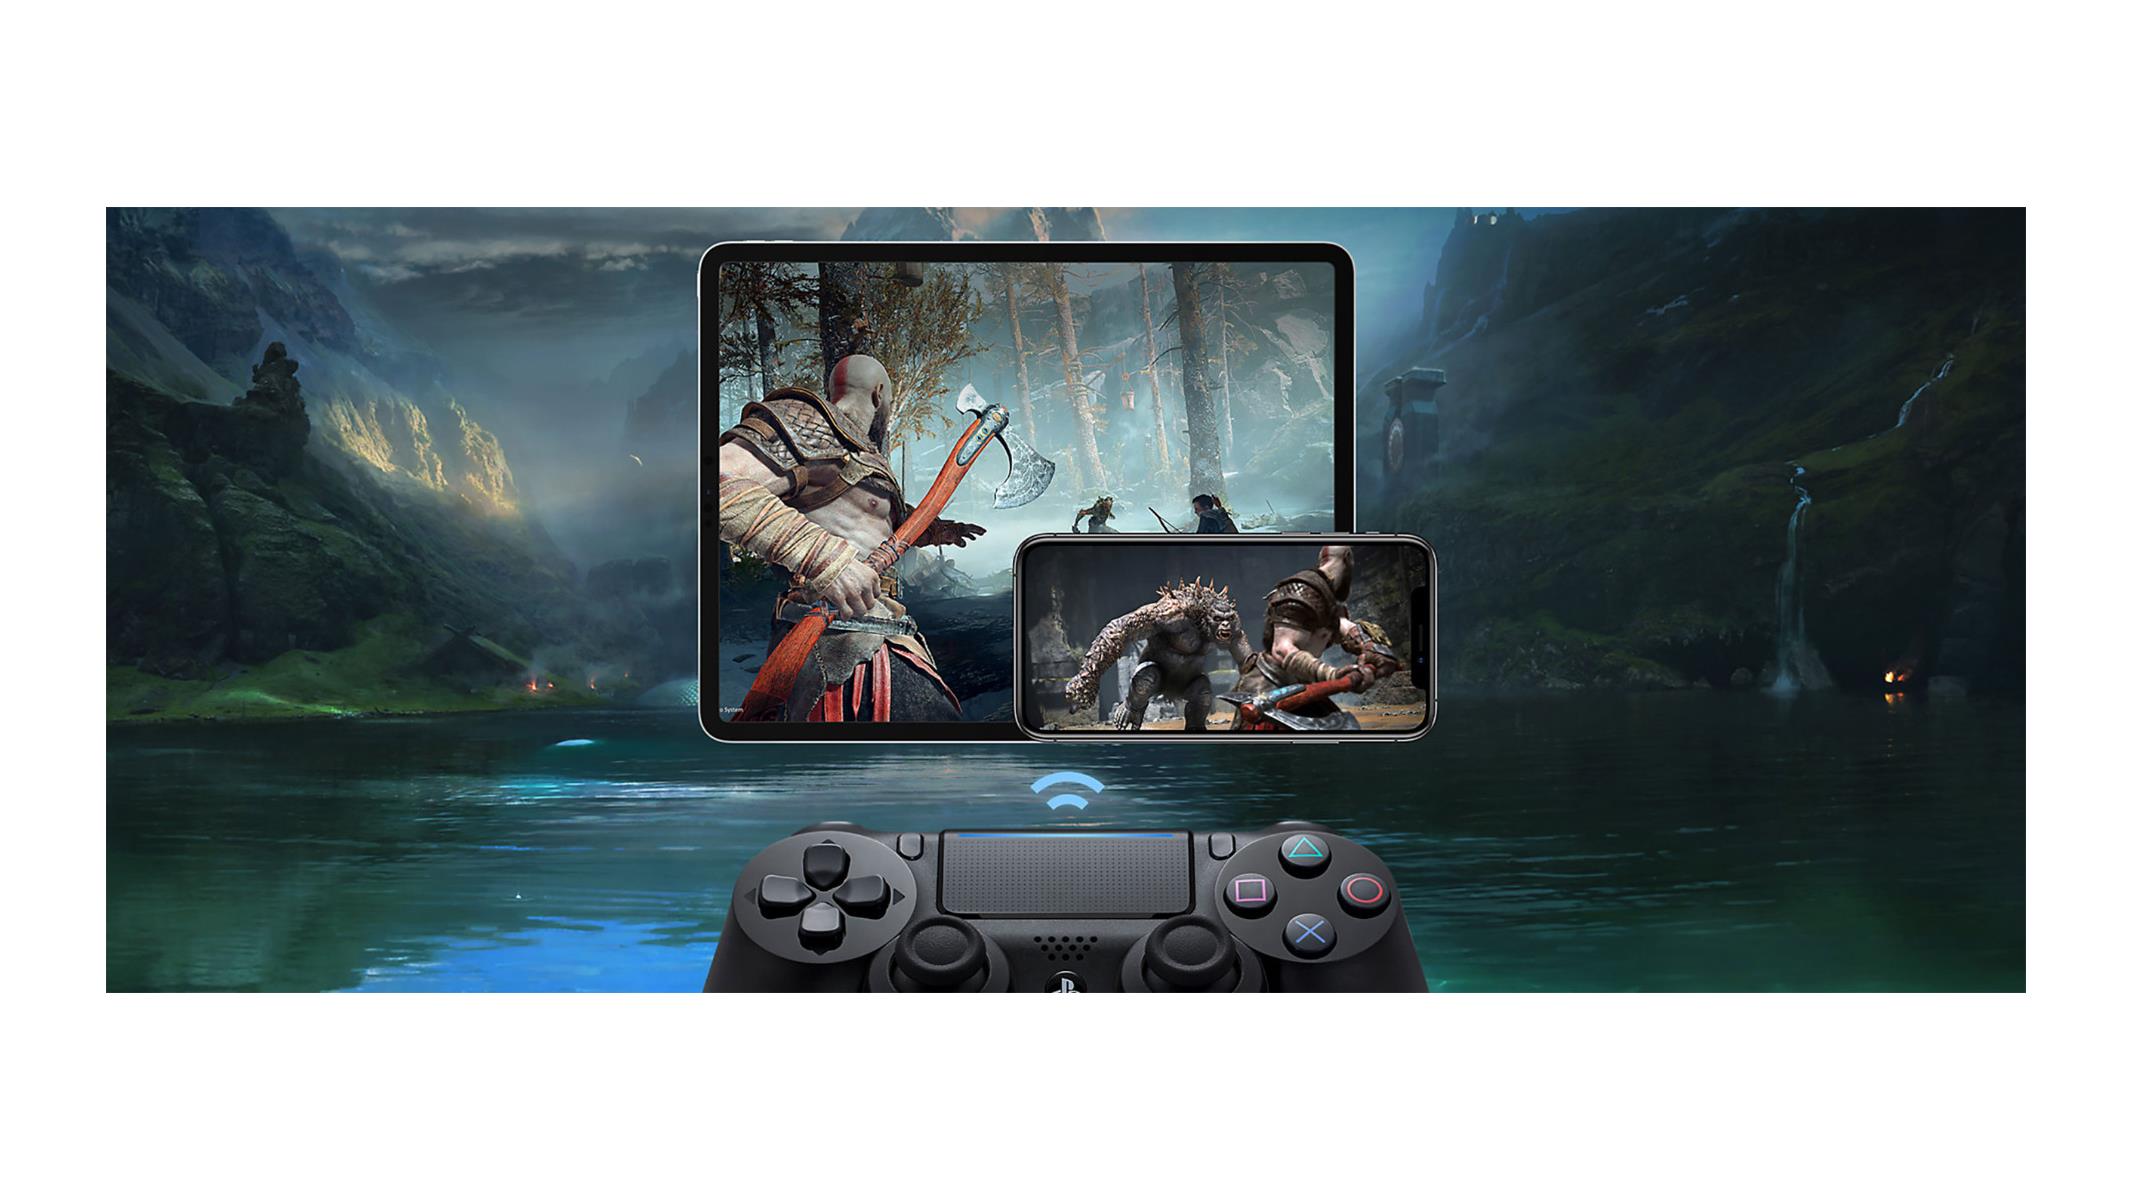 remote play ps4 nintendo switch